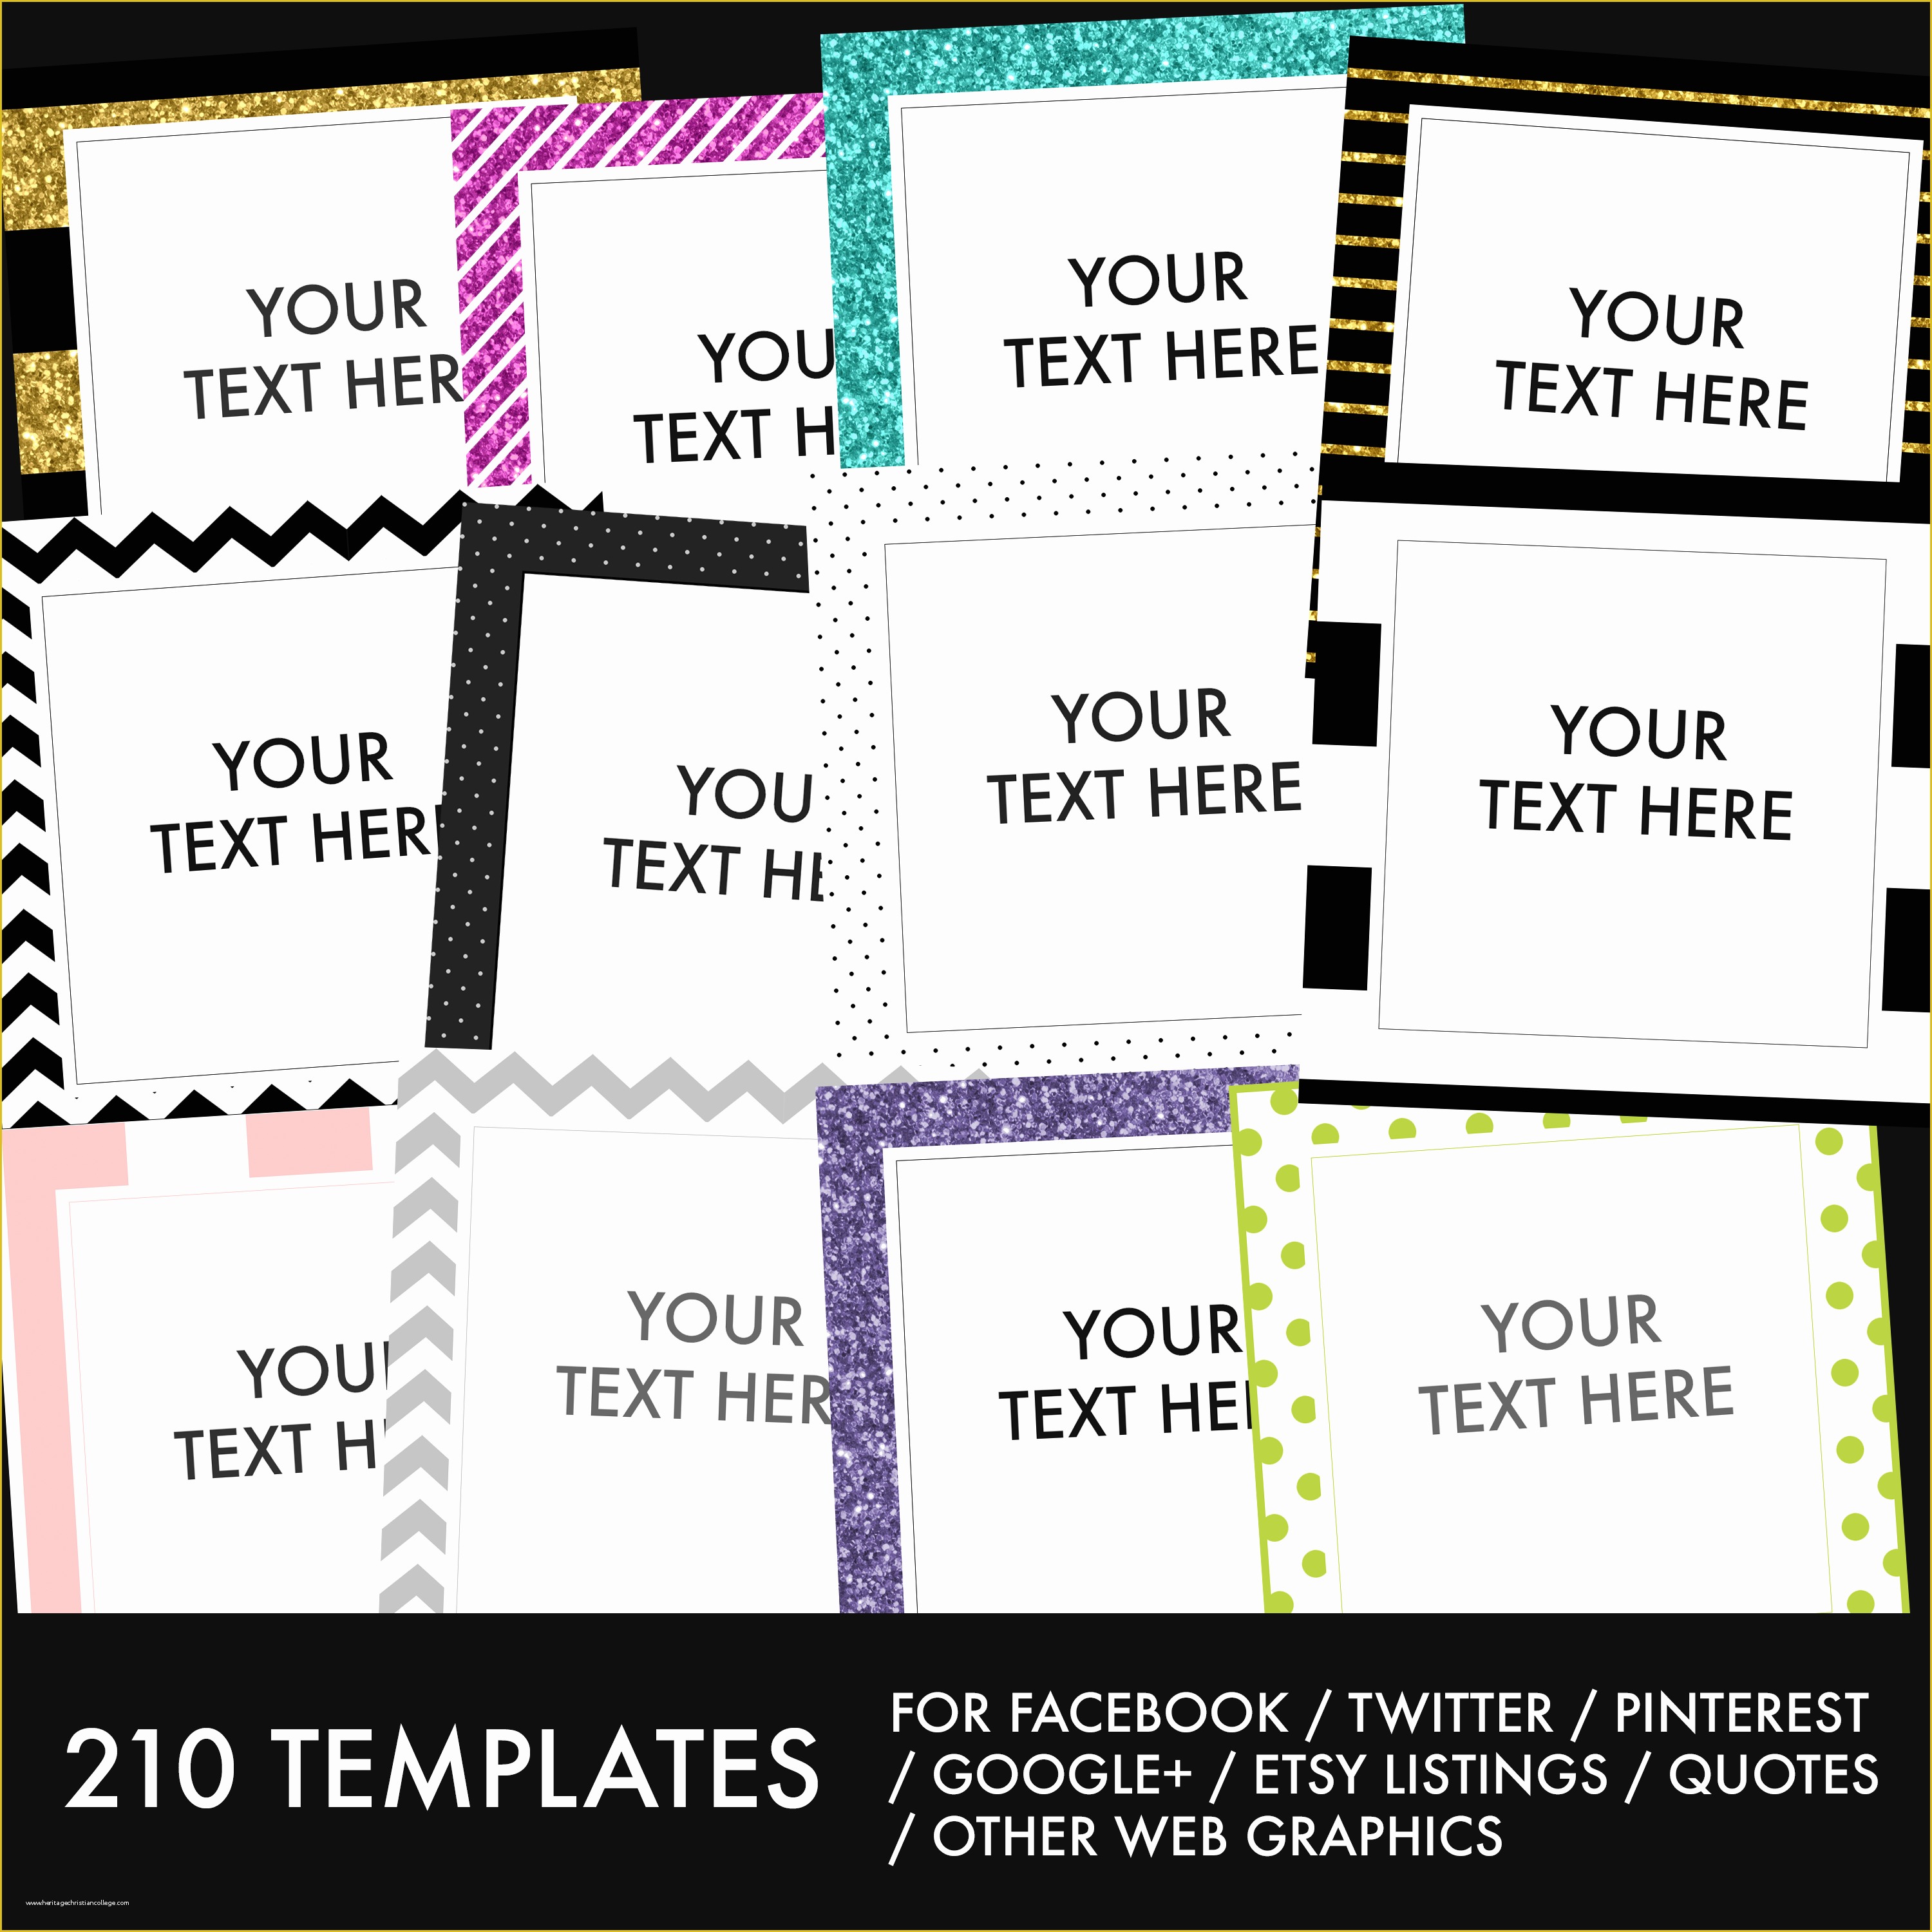 Social Media Post Template Free Of 210 Image Templates You Can Use for Your Blog social